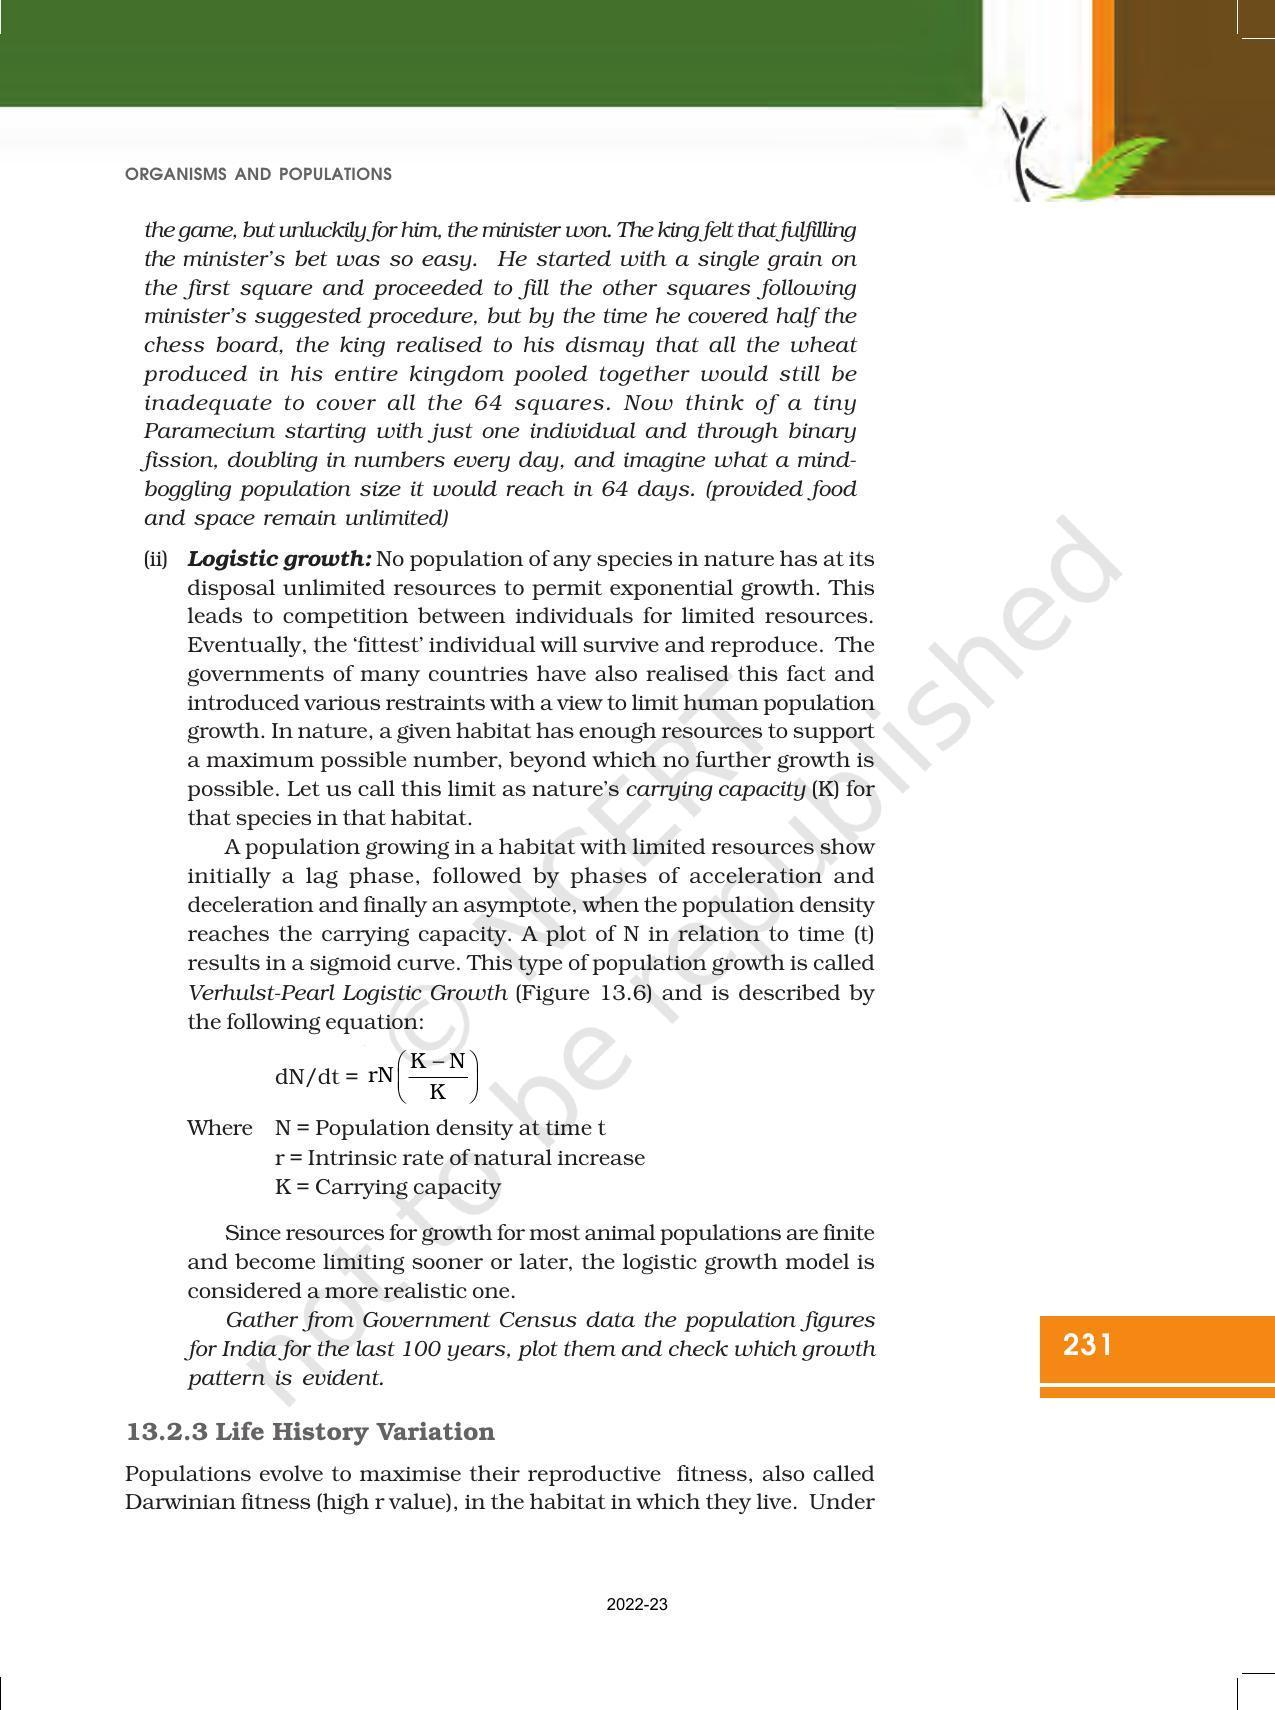 NCERT Book for Class 12 Biology Chapter 13 Organisms and Populations - Page 15